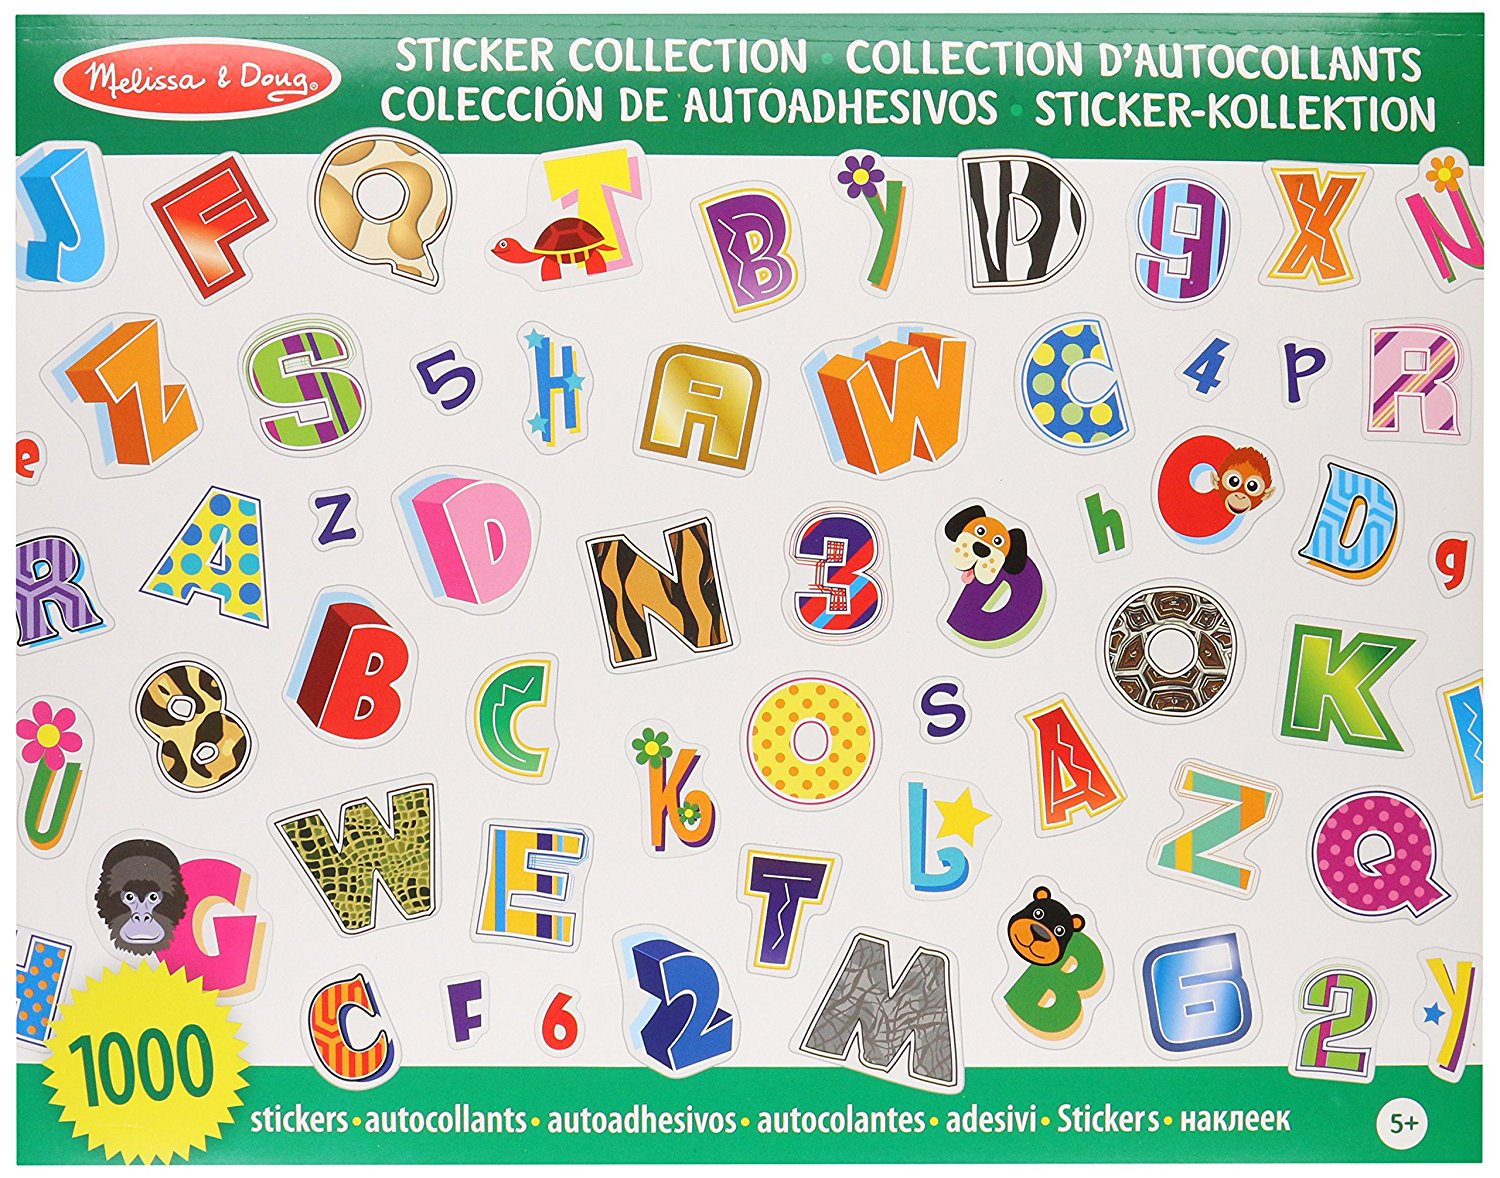 LETTERS & NUMBERS STICKER SET. [Book]